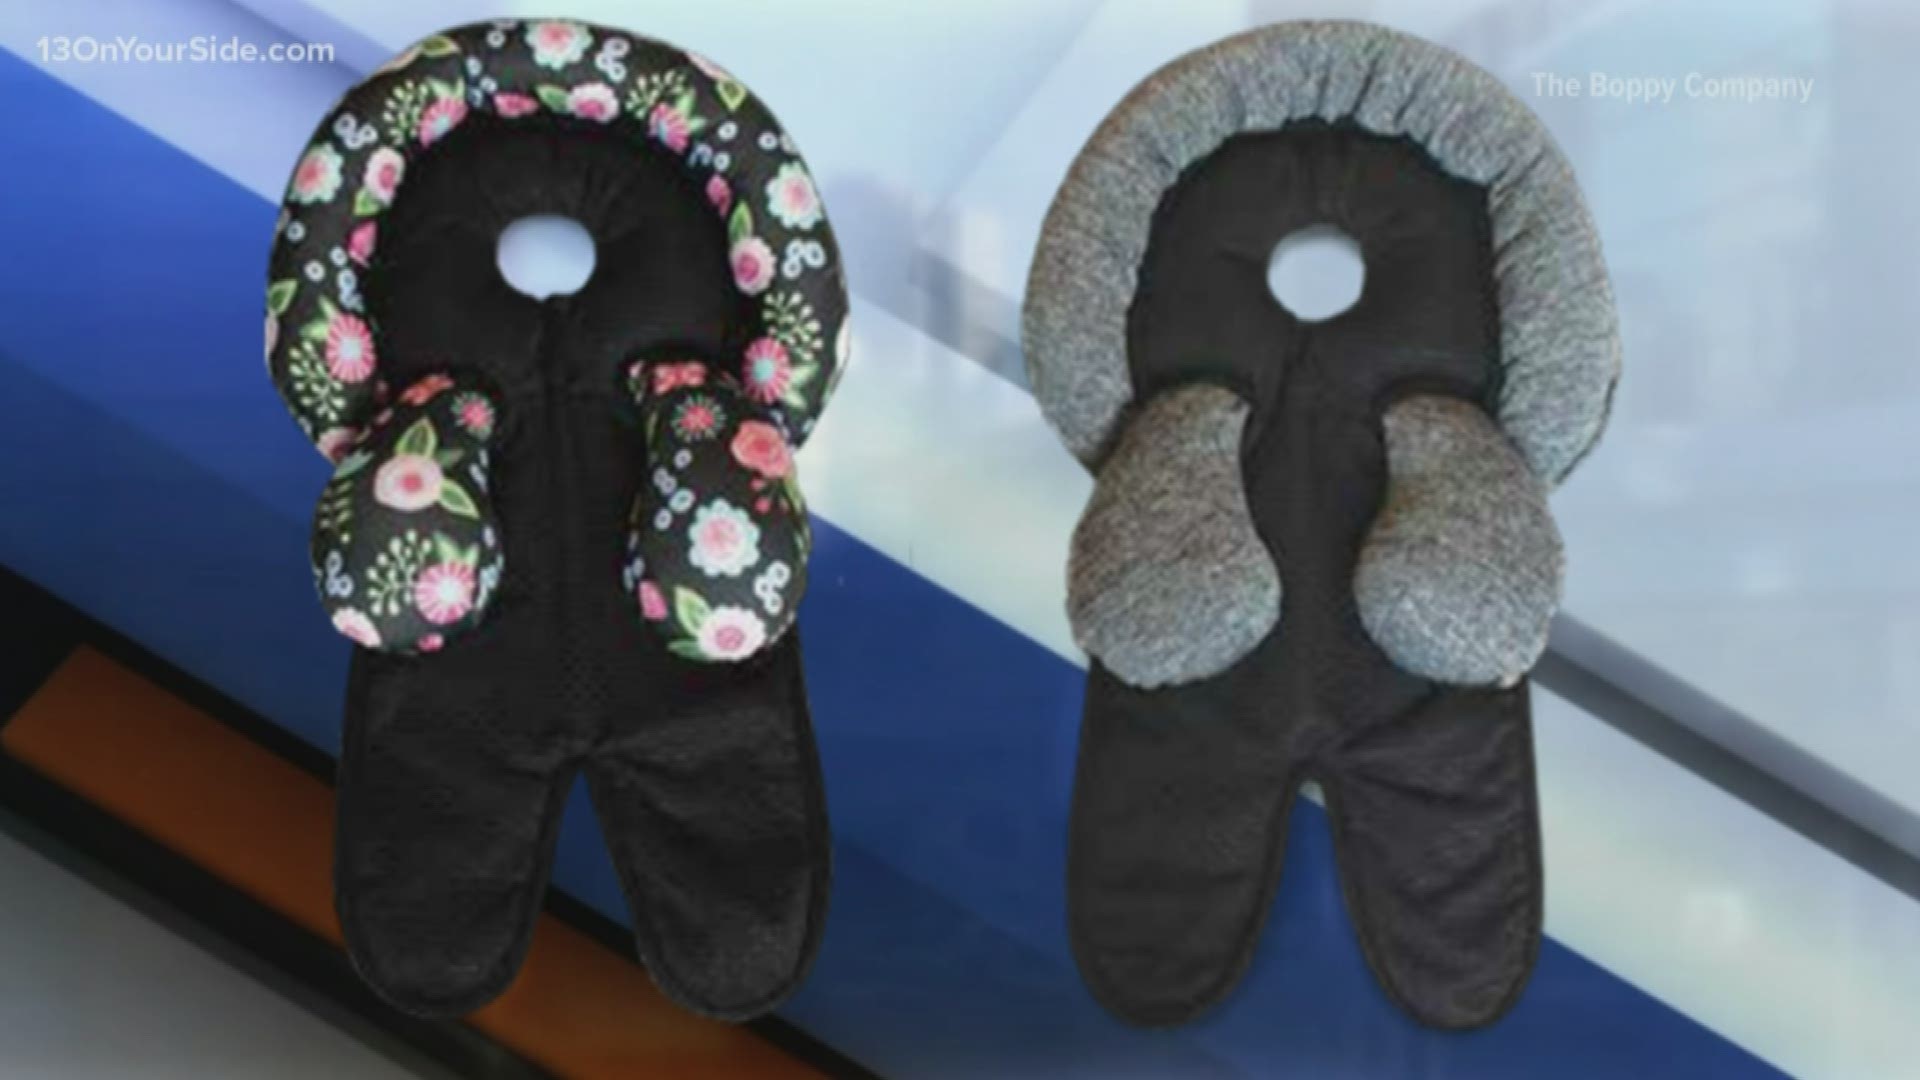 The Boppy Company is recalling 14,000 of its infant head and neck support accessories over suffocation concerns. According to the Consumer Product Safety Commission, the overstuffing of the head support area can "cause an infant's head to be tilted too far forward."